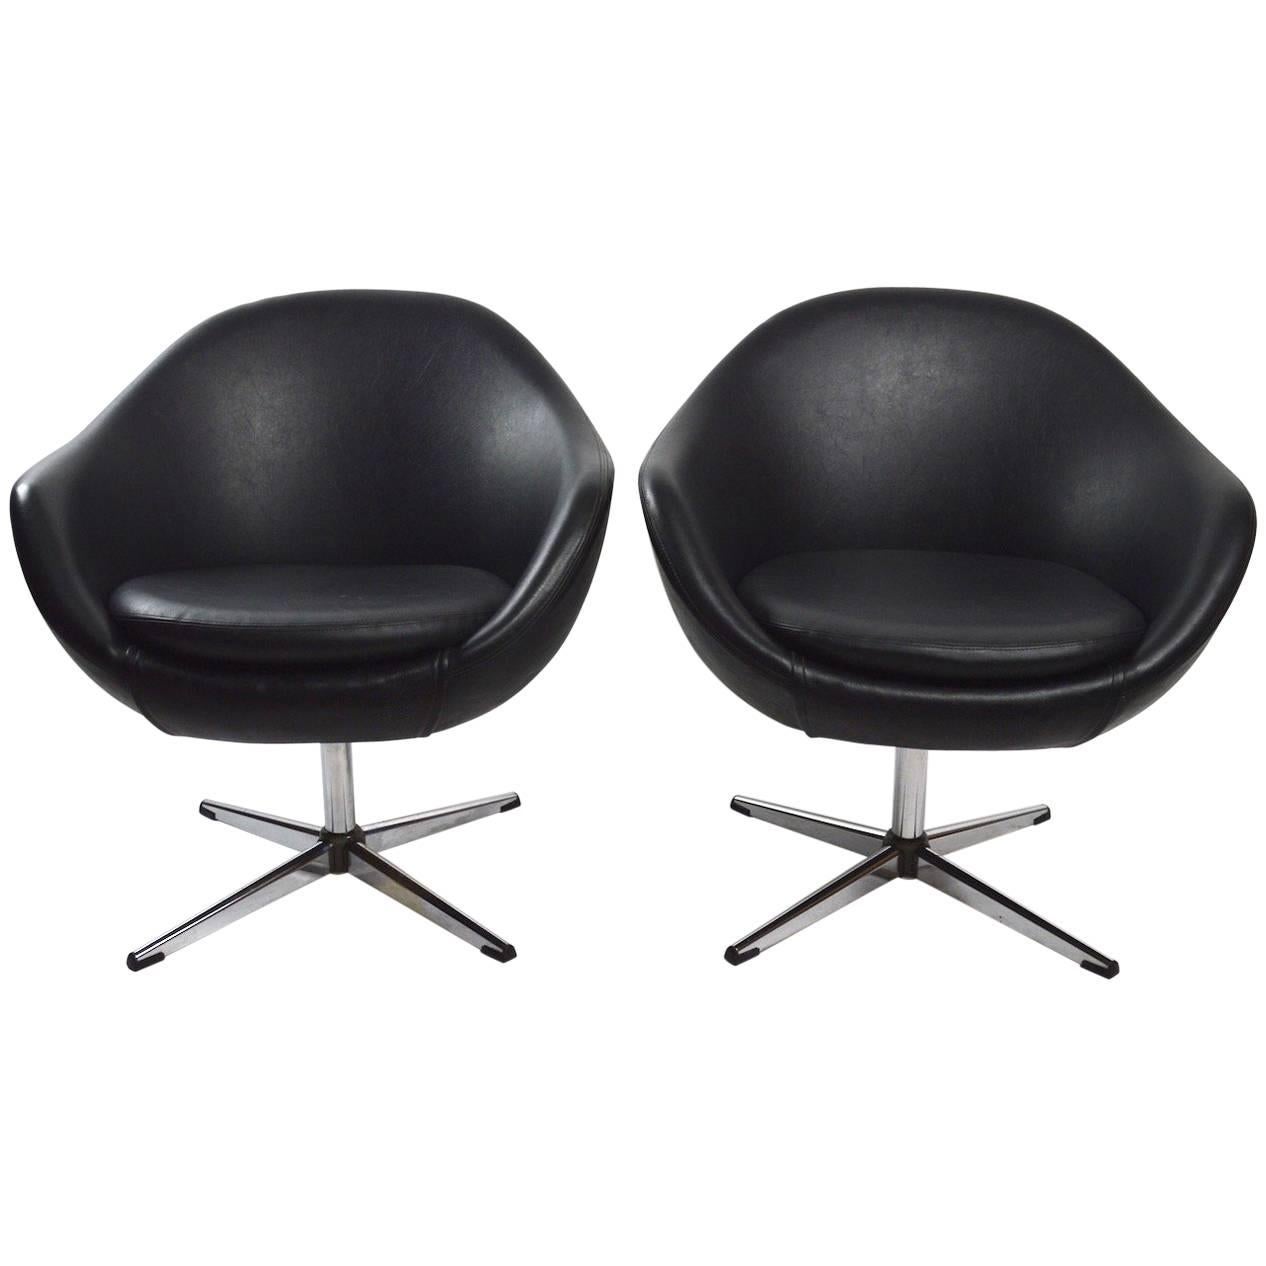 Pair of Overman Swivel Chairs